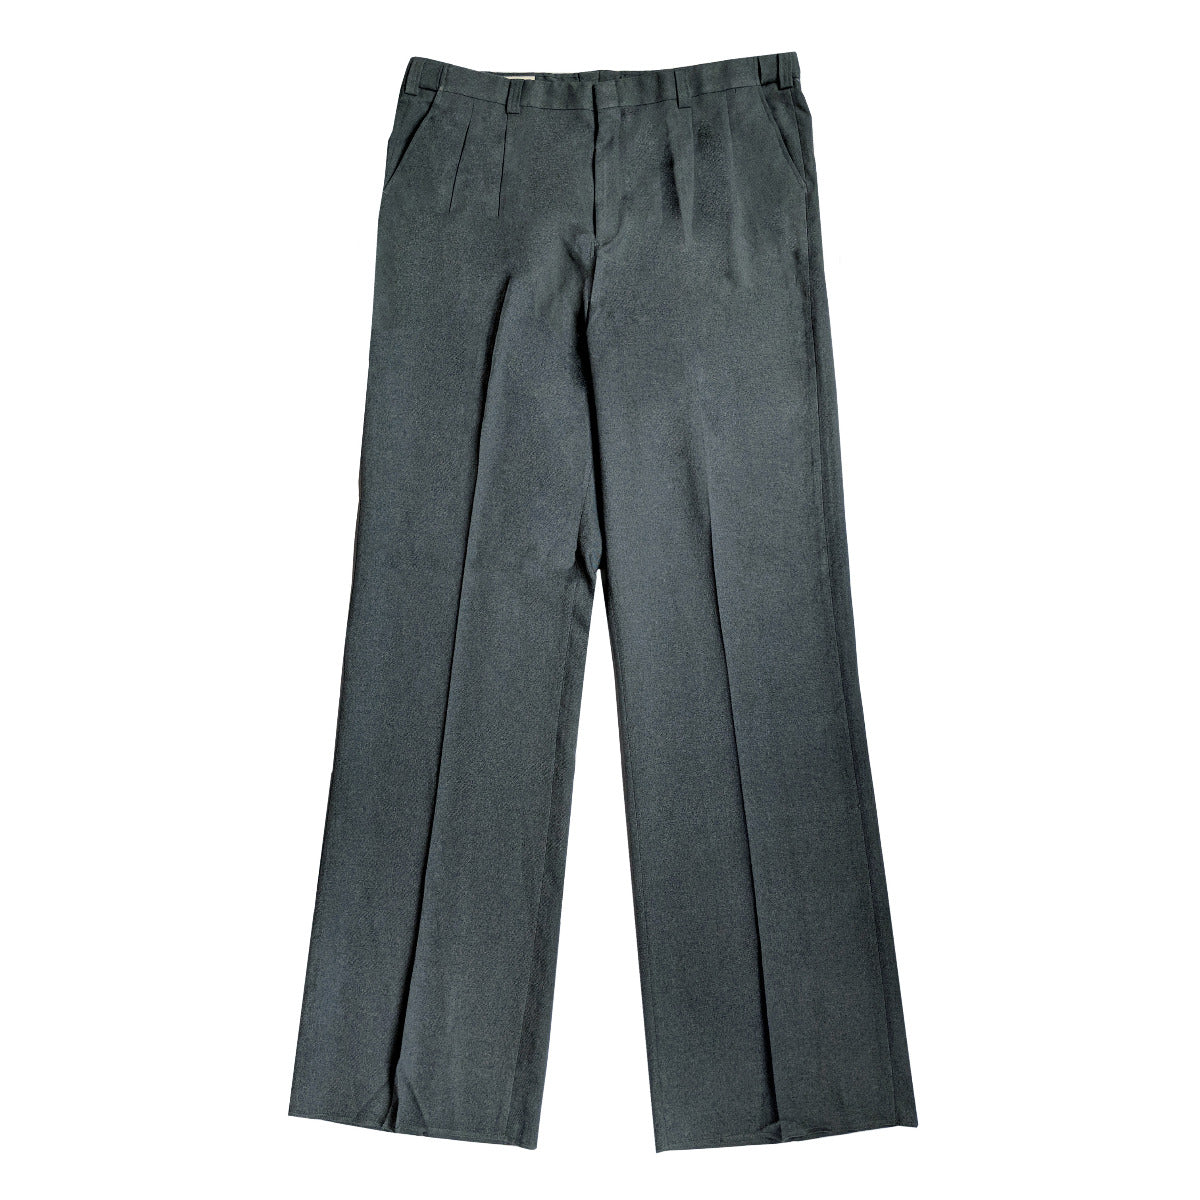 Smitty's Charcoal Grey Pleated Plate Pants w/ Expander Waist